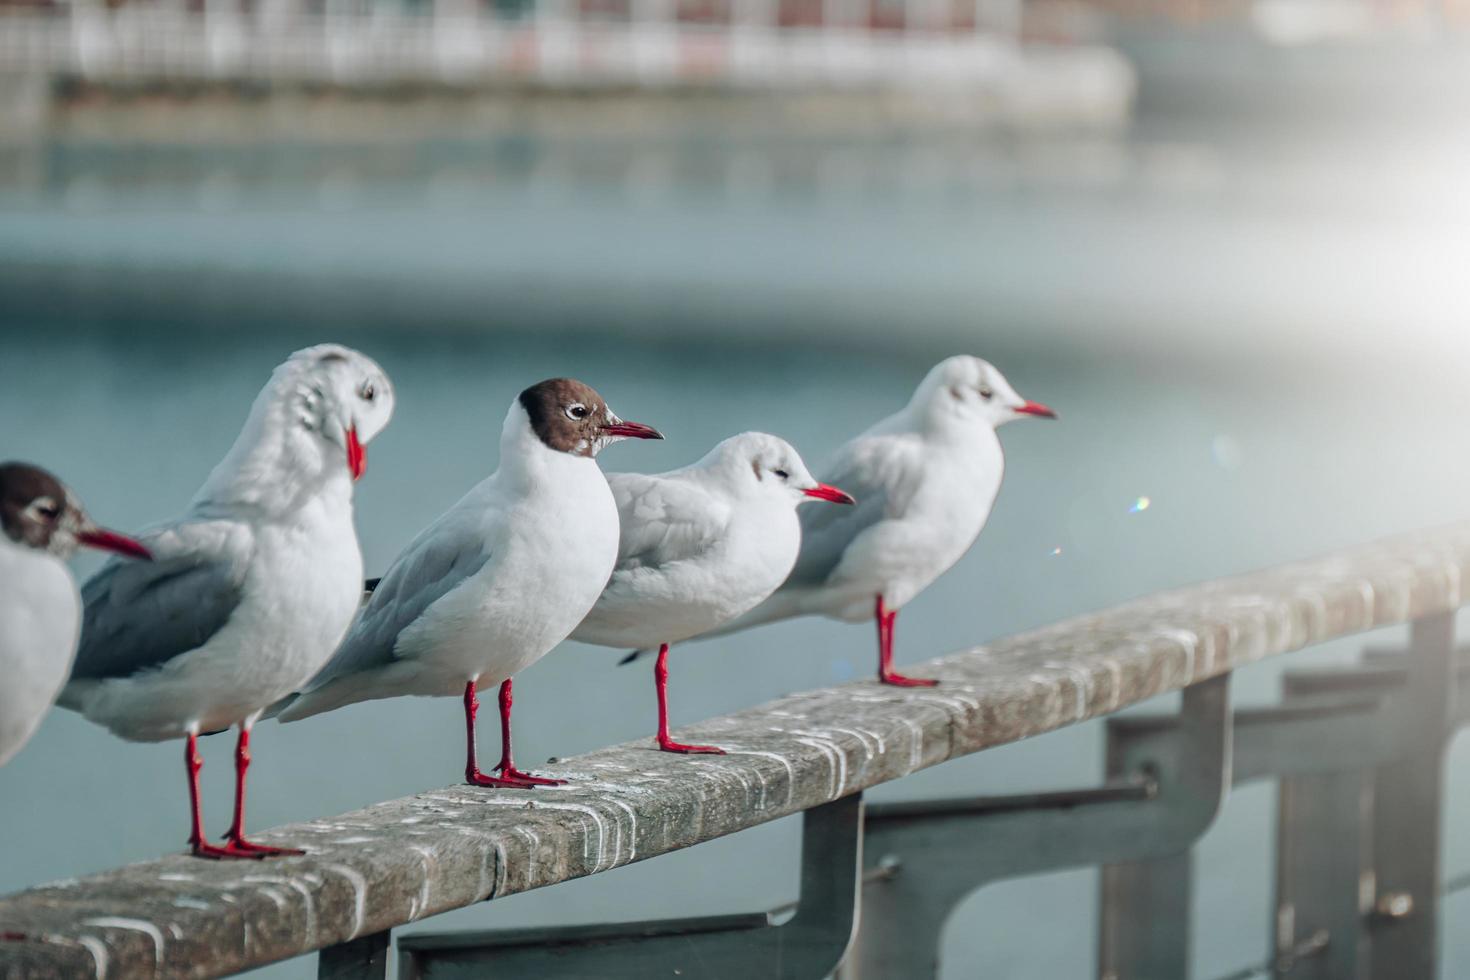 seagulls in the seaport photo